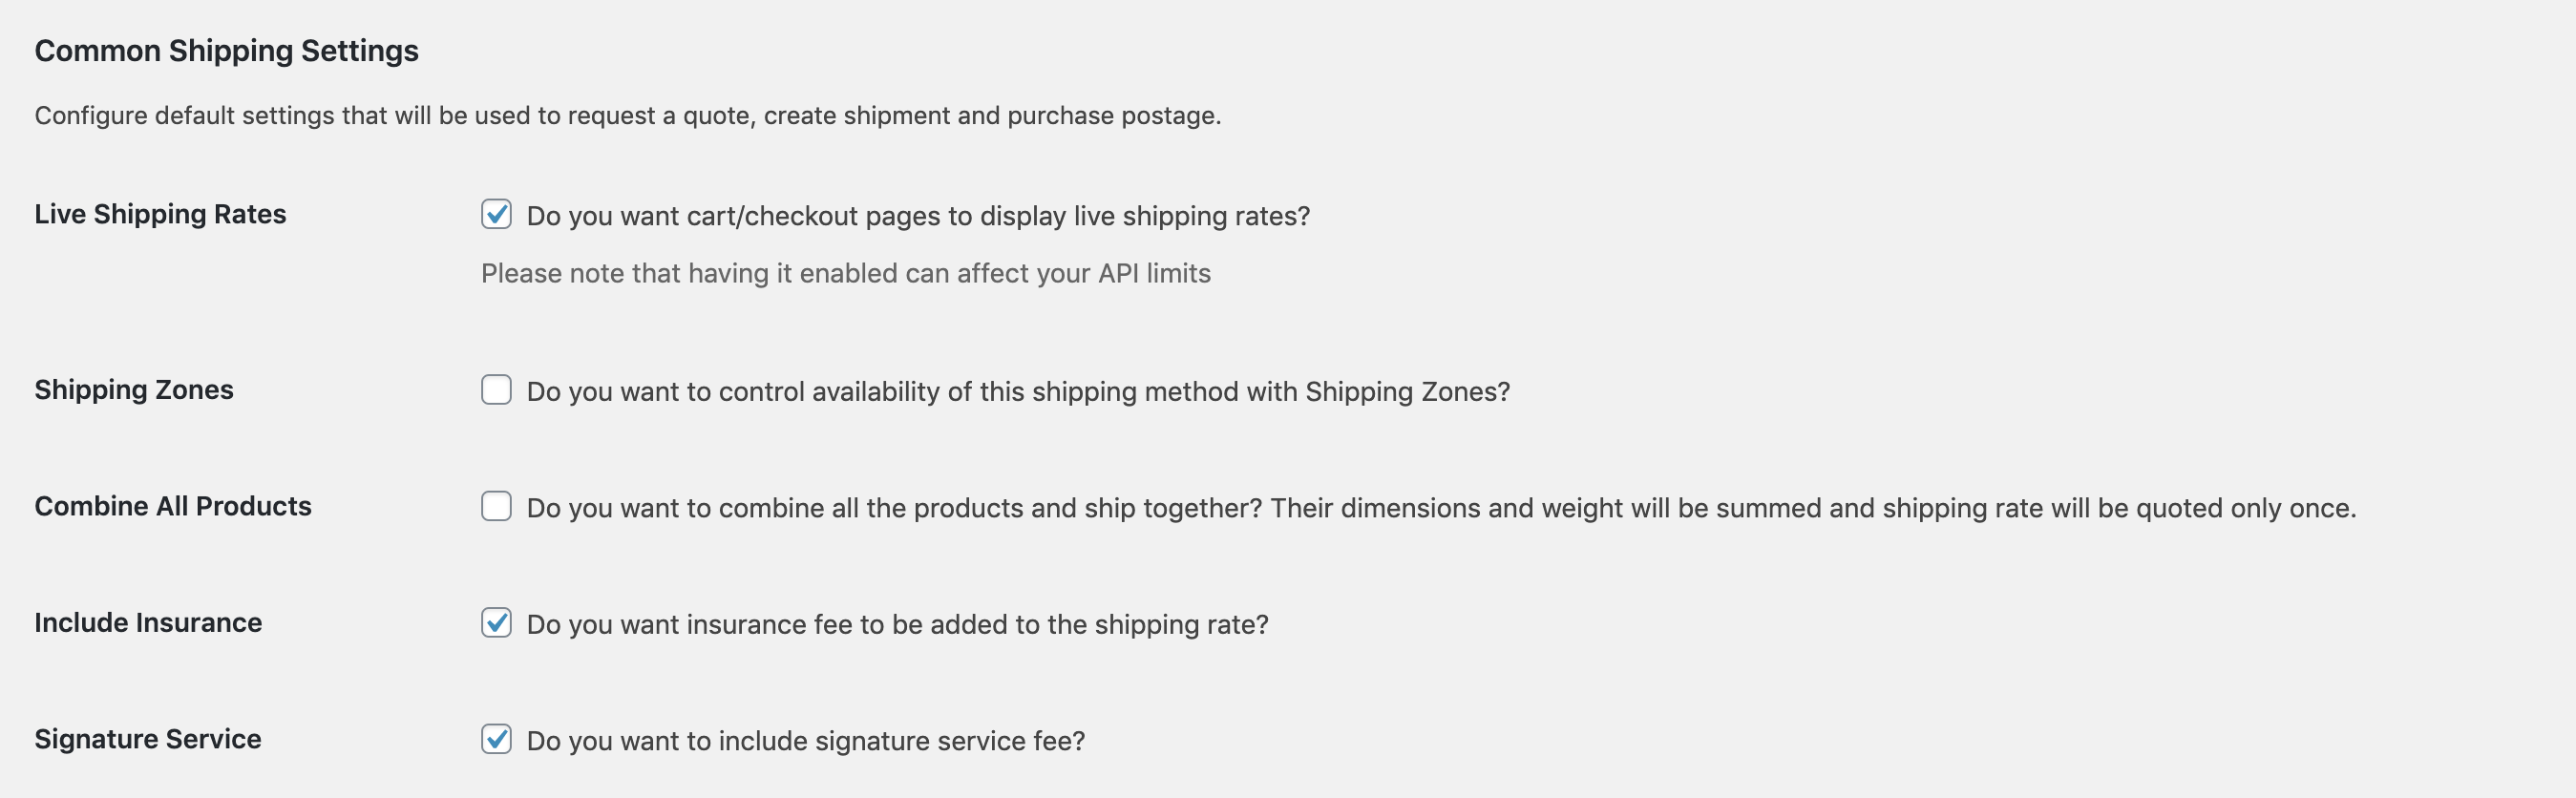 Common Shipping Settings